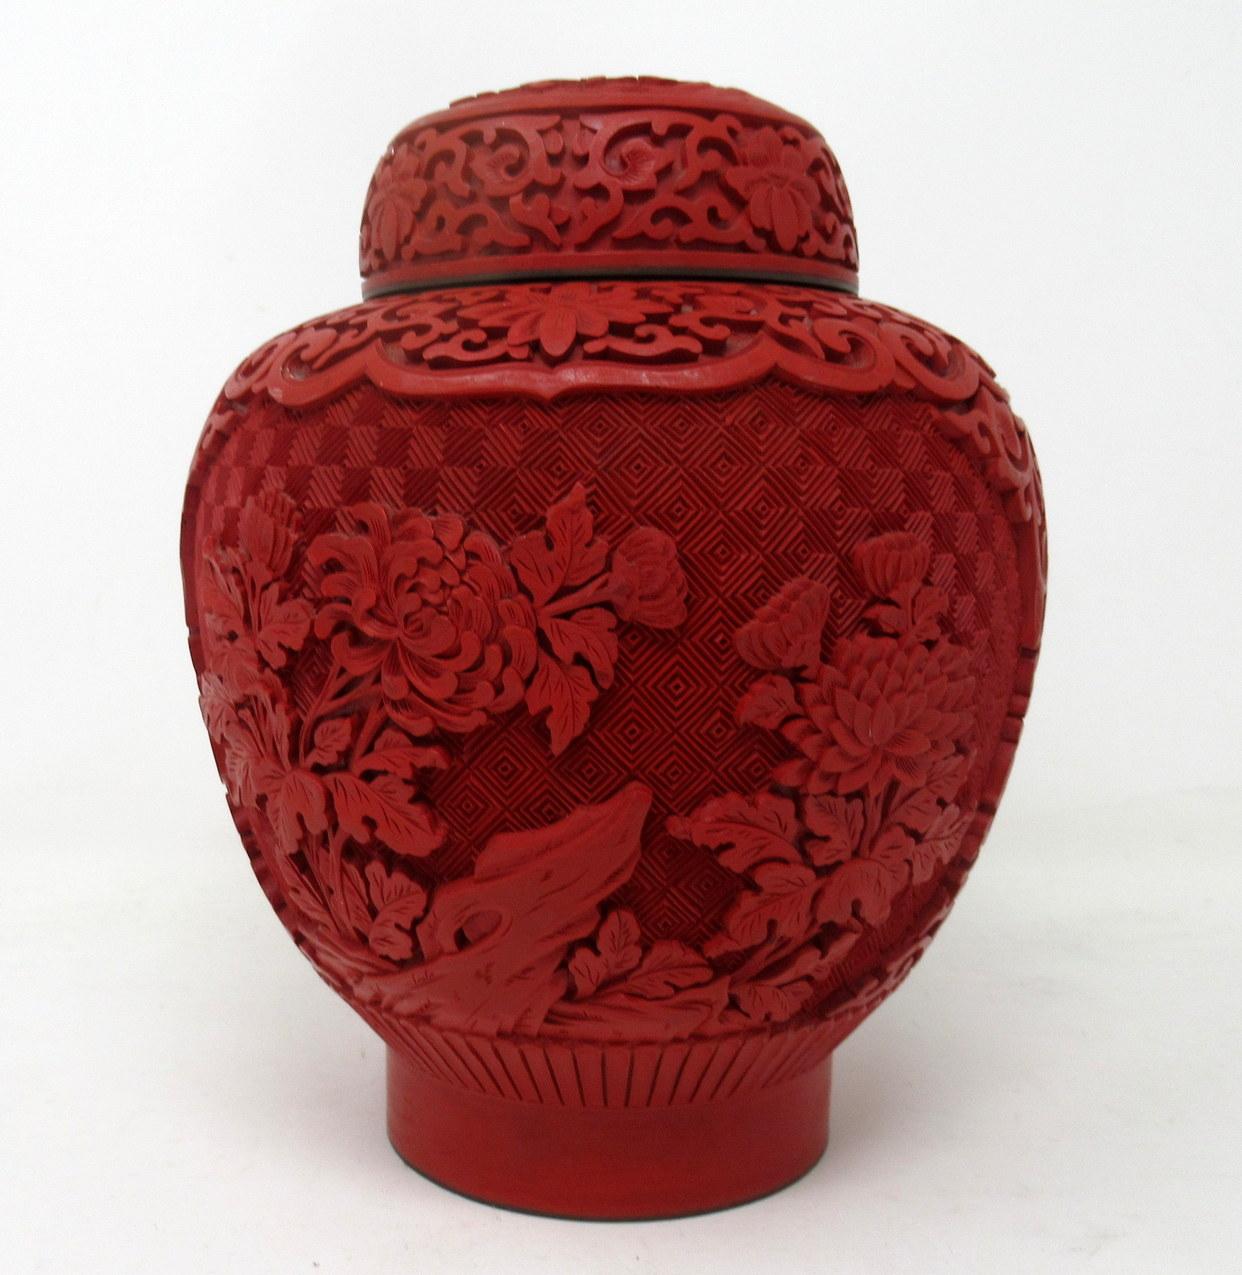 Stunning Chinese hand carved cinnabar lacquer bowl and cover of outstanding quality and generous size, made during the first half of the 20th 19th century.
The short neck deep rounded bulbous body above a cylindrical spreading foot. The main body